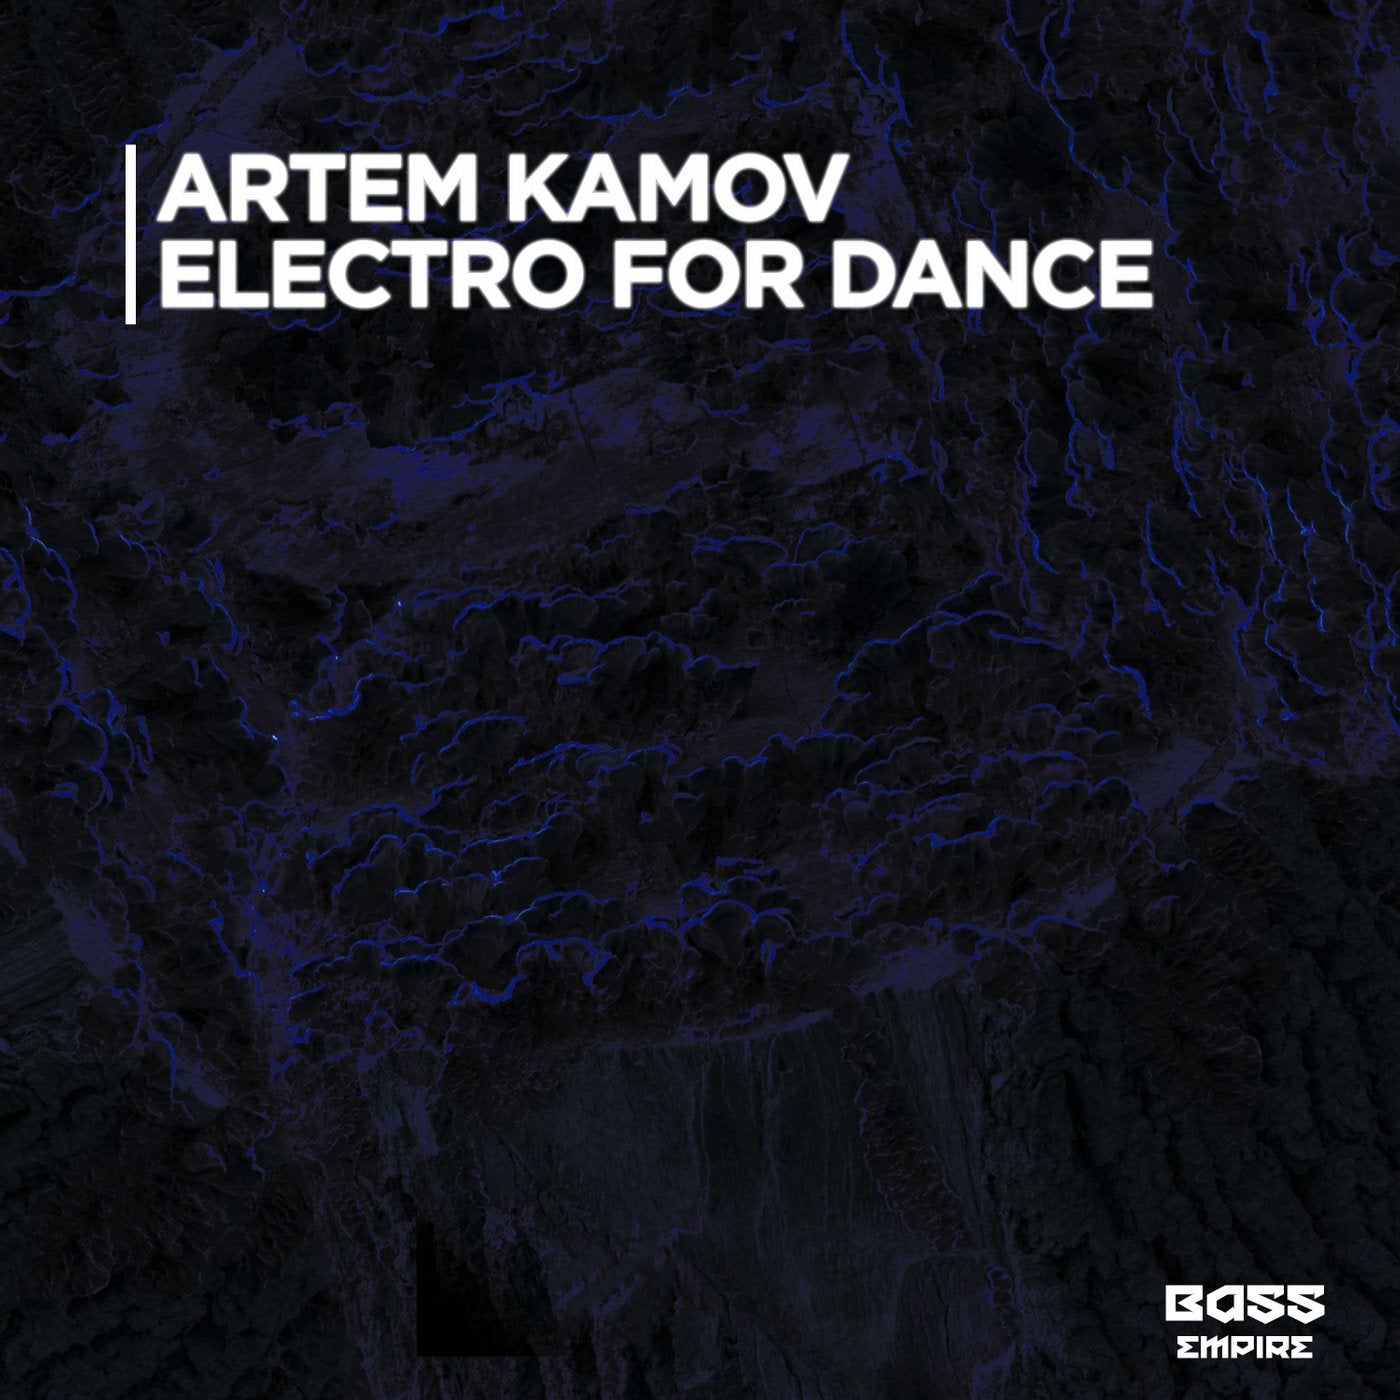 Electro for Dance